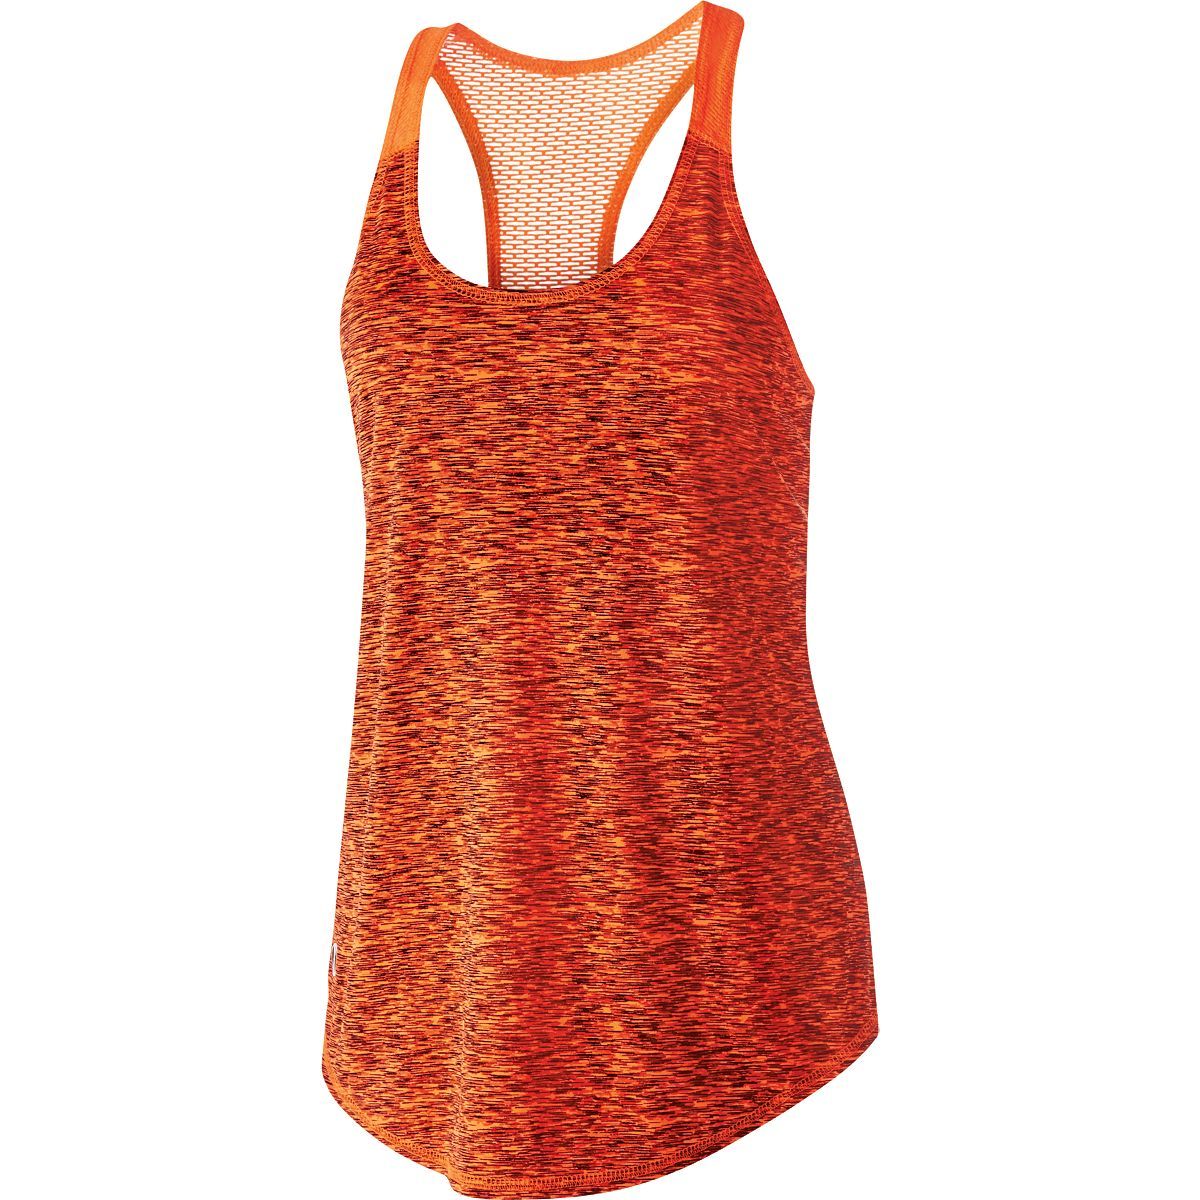 Holloway Ladies Space Dye Tank in Orange/Bright Orange  -Part of the Ladies, Ladies-Tank, Holloway, Shirts product lines at KanaleyCreations.com